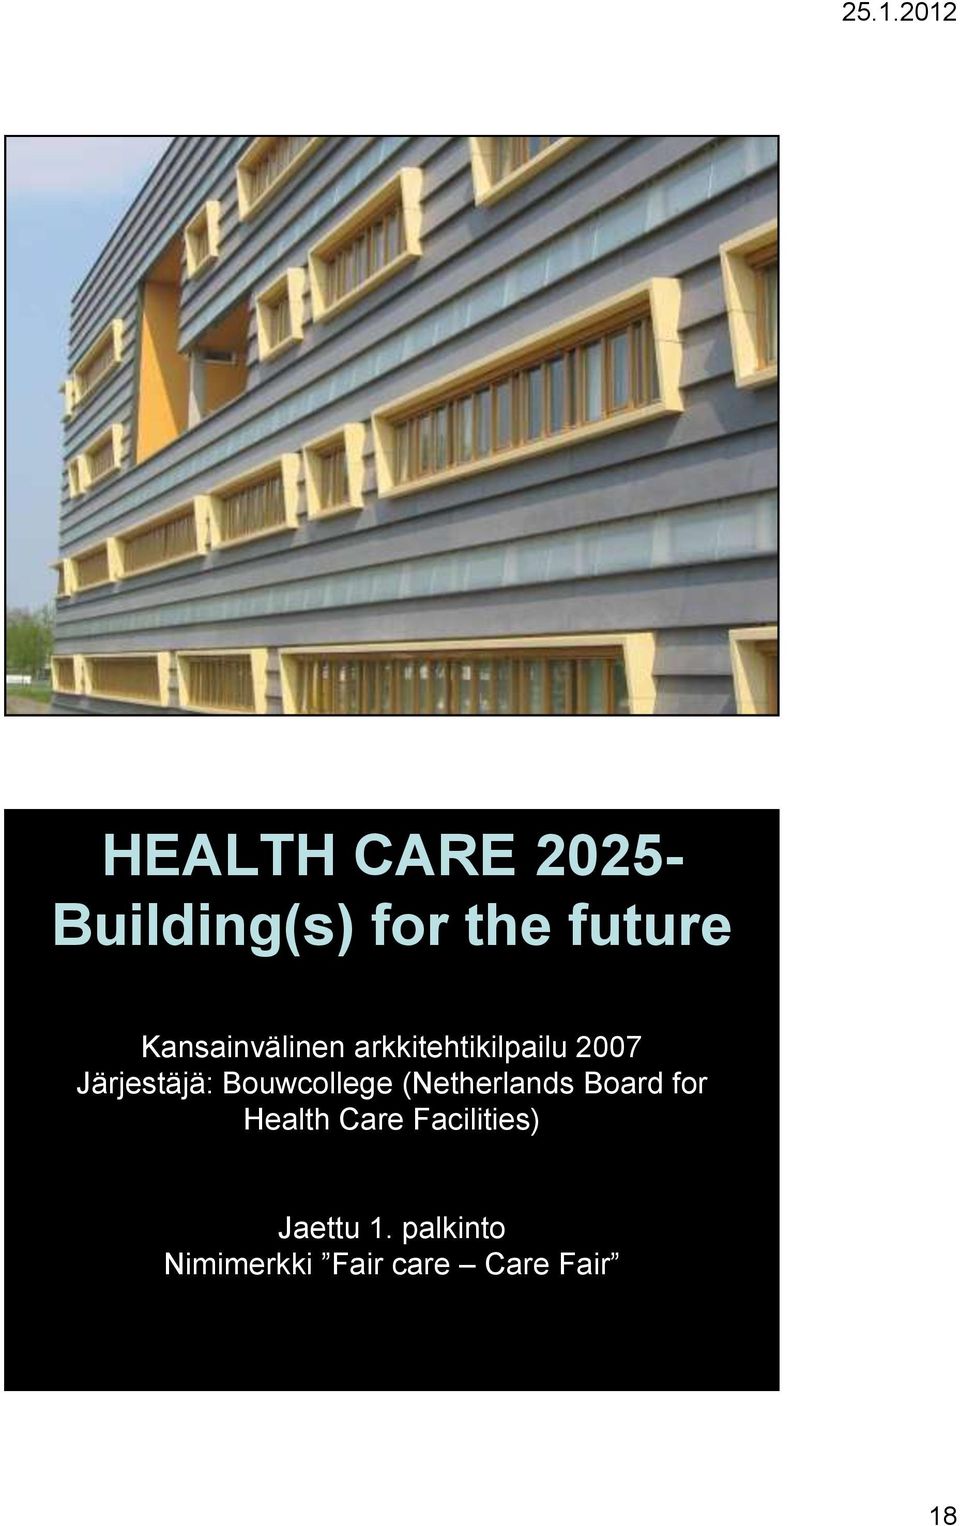 Bouwcollege (Netherlands Board for Health Care